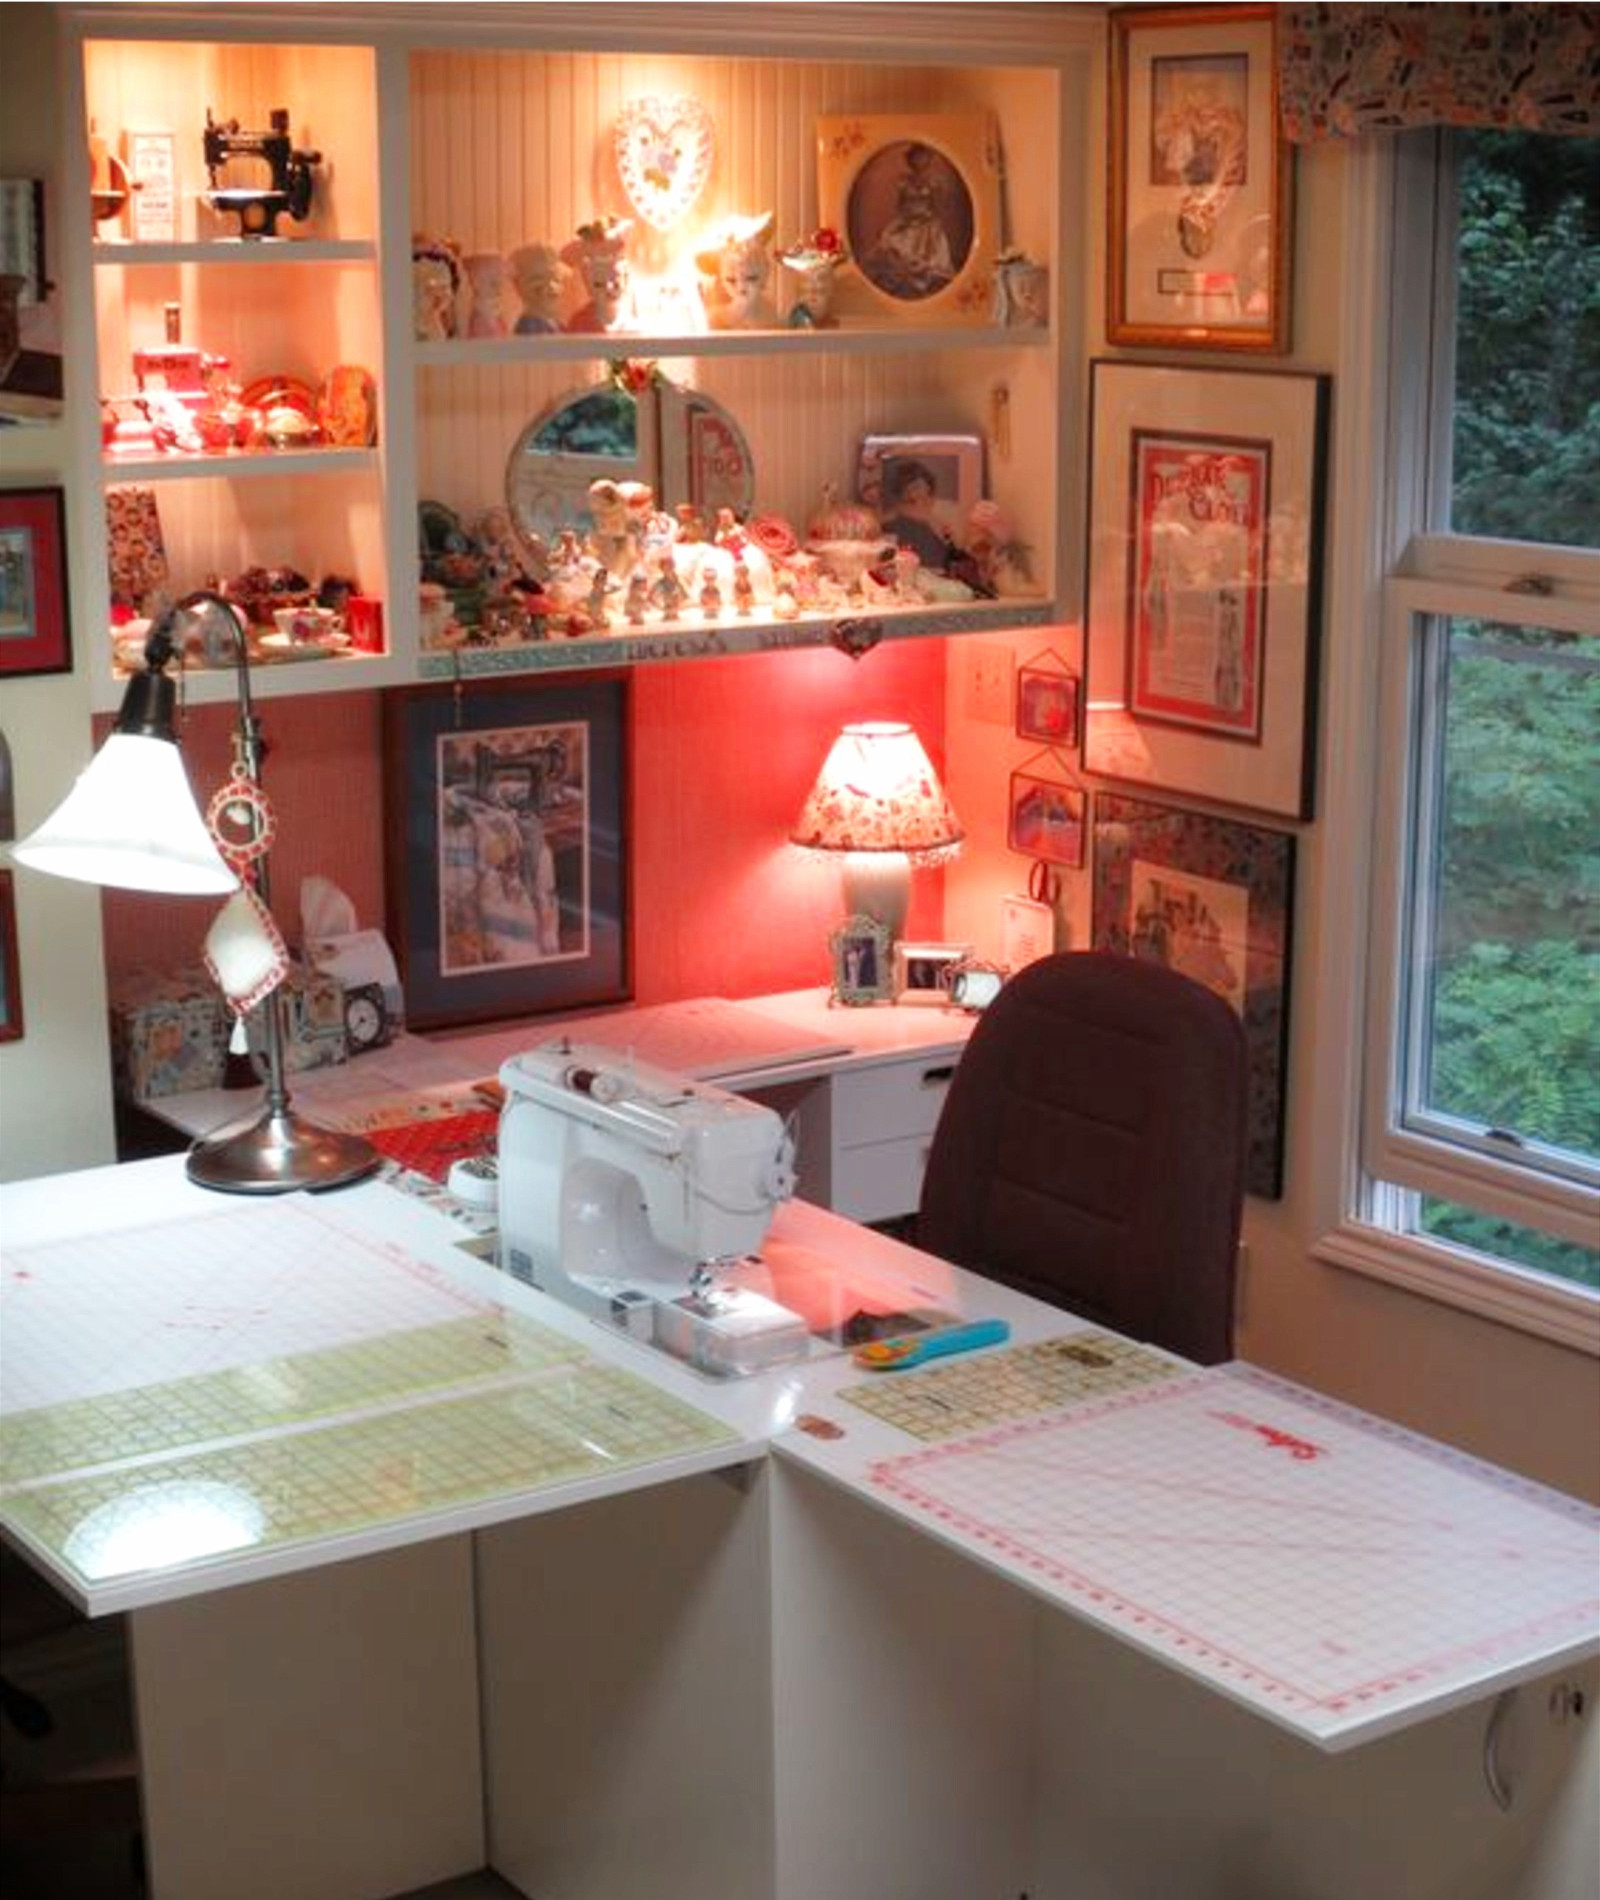 Gorgeous sewing room idea!